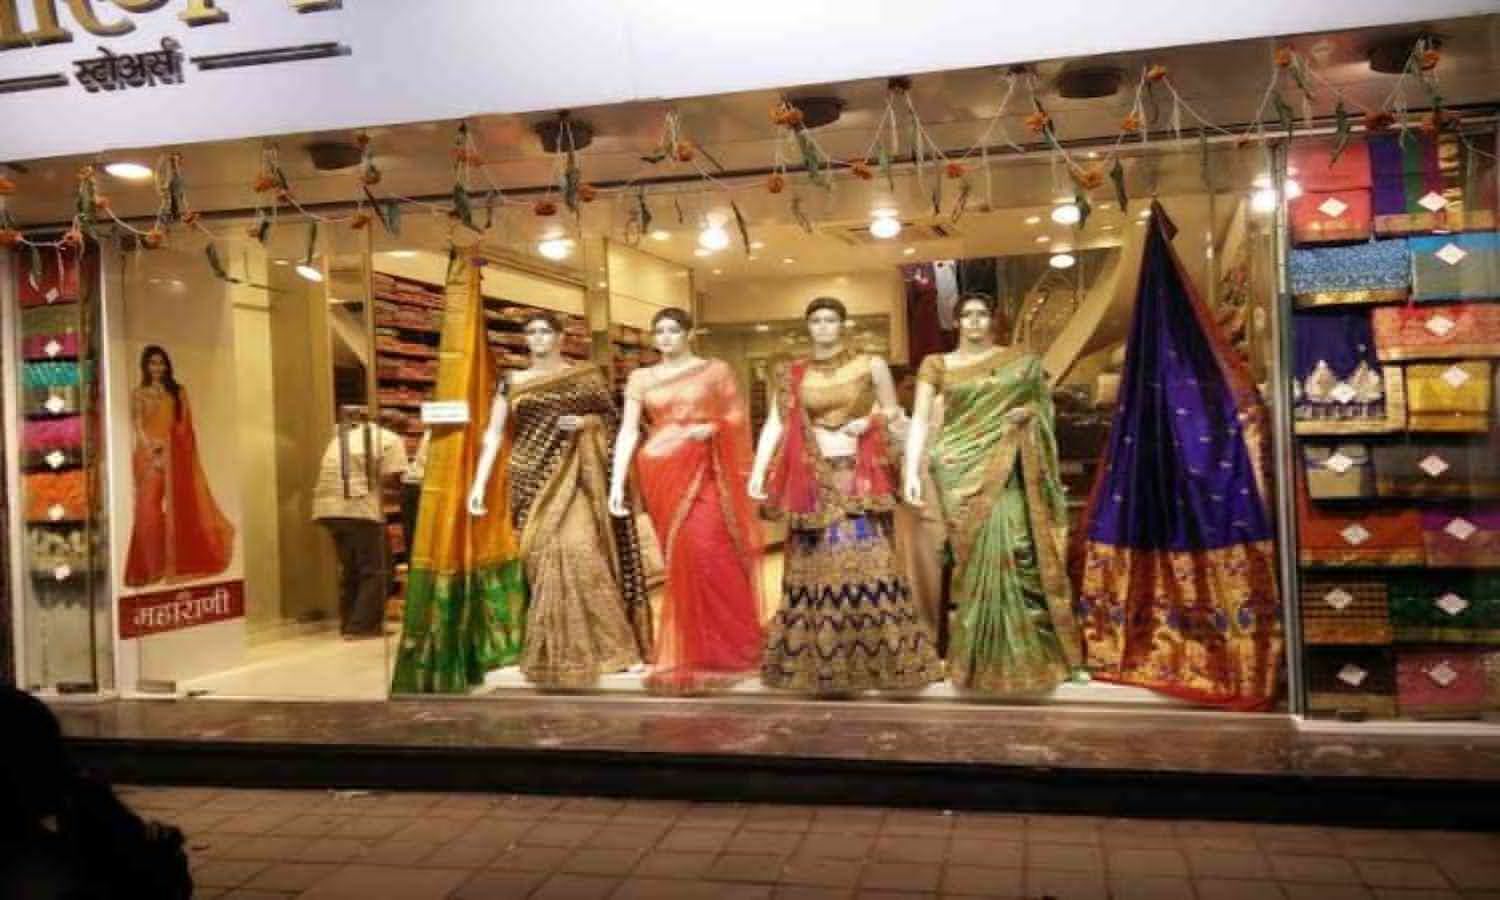 Famous Saree Shops in Patna: These are 20 famous saree shops in Patna where you can get designer sarees at affordable prices.